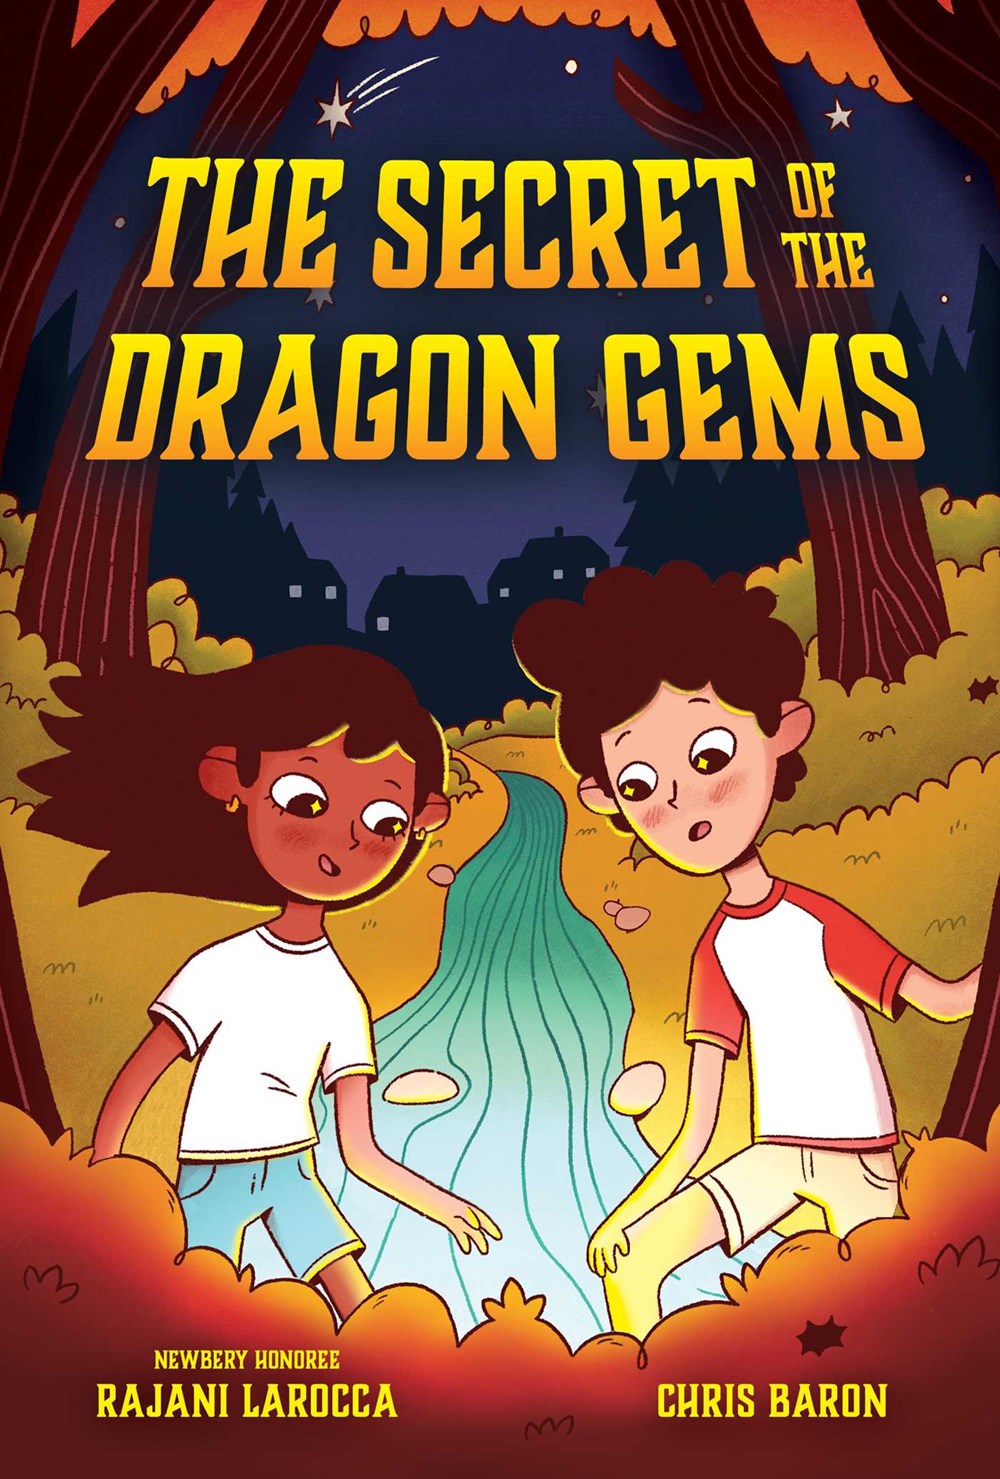 Cover of The Secret of the Dragon Gems by LaRocca